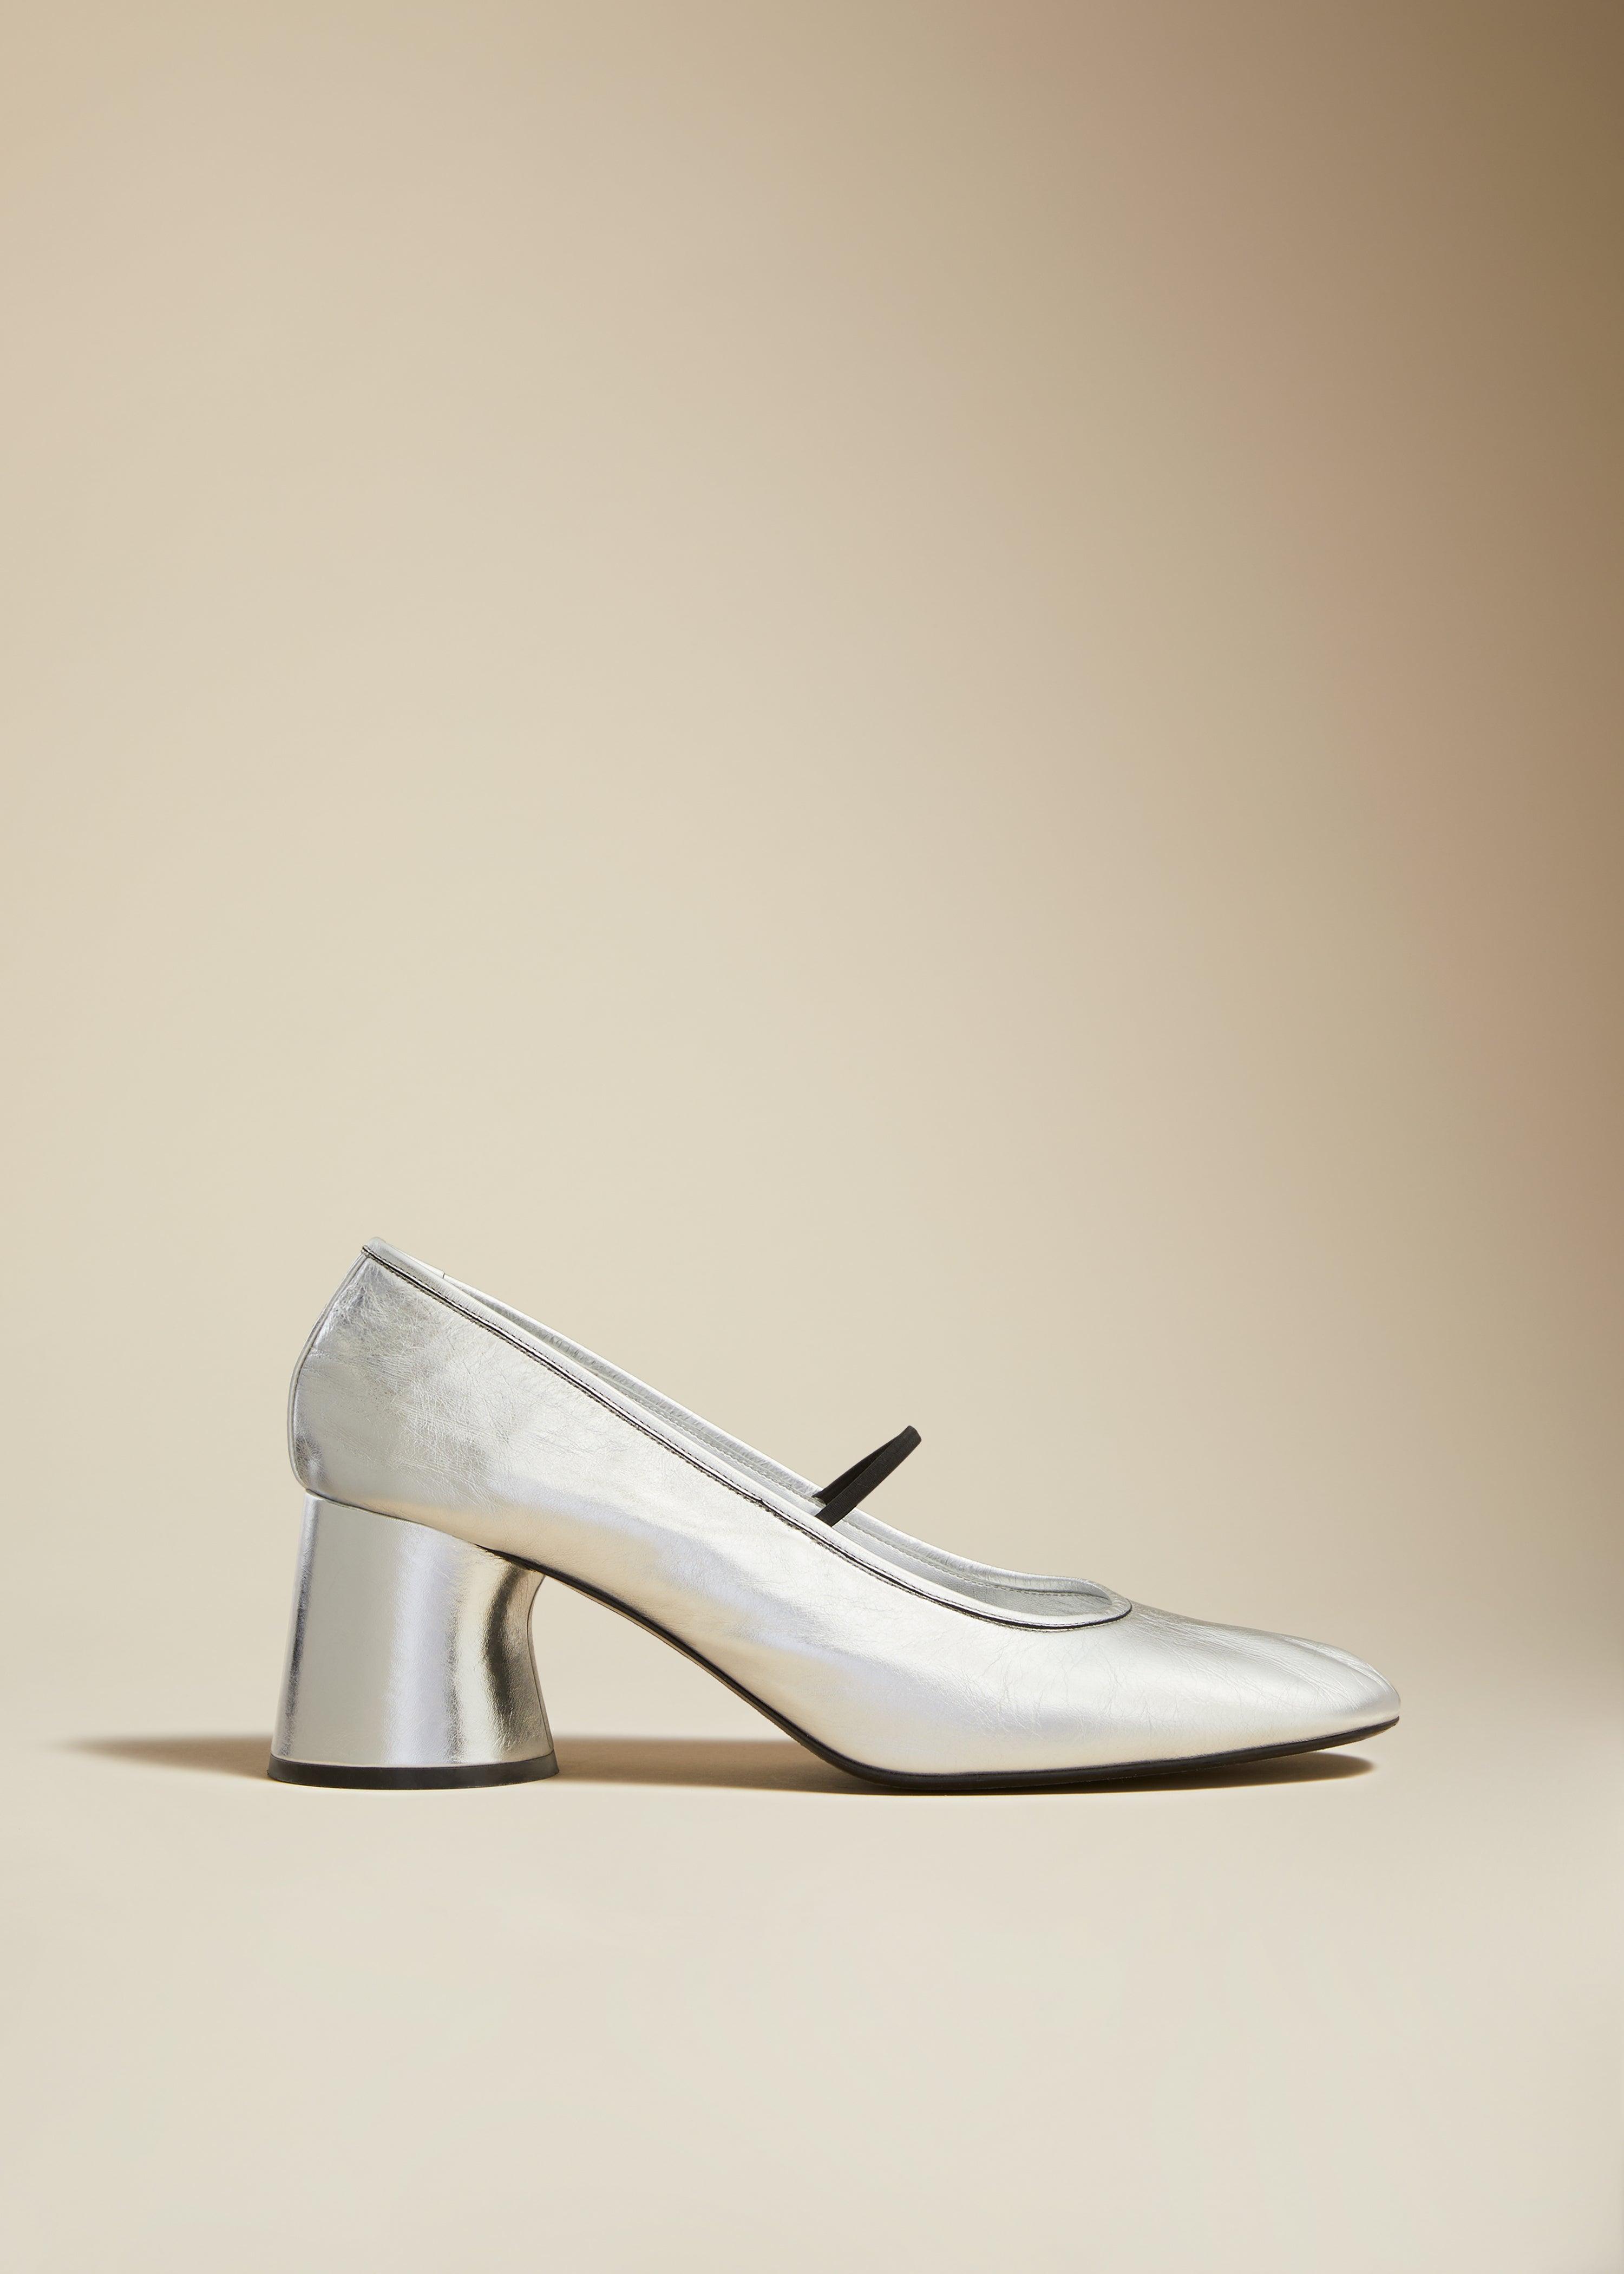 The Lorimer Pump in Silver Leather - The Iconic Issue